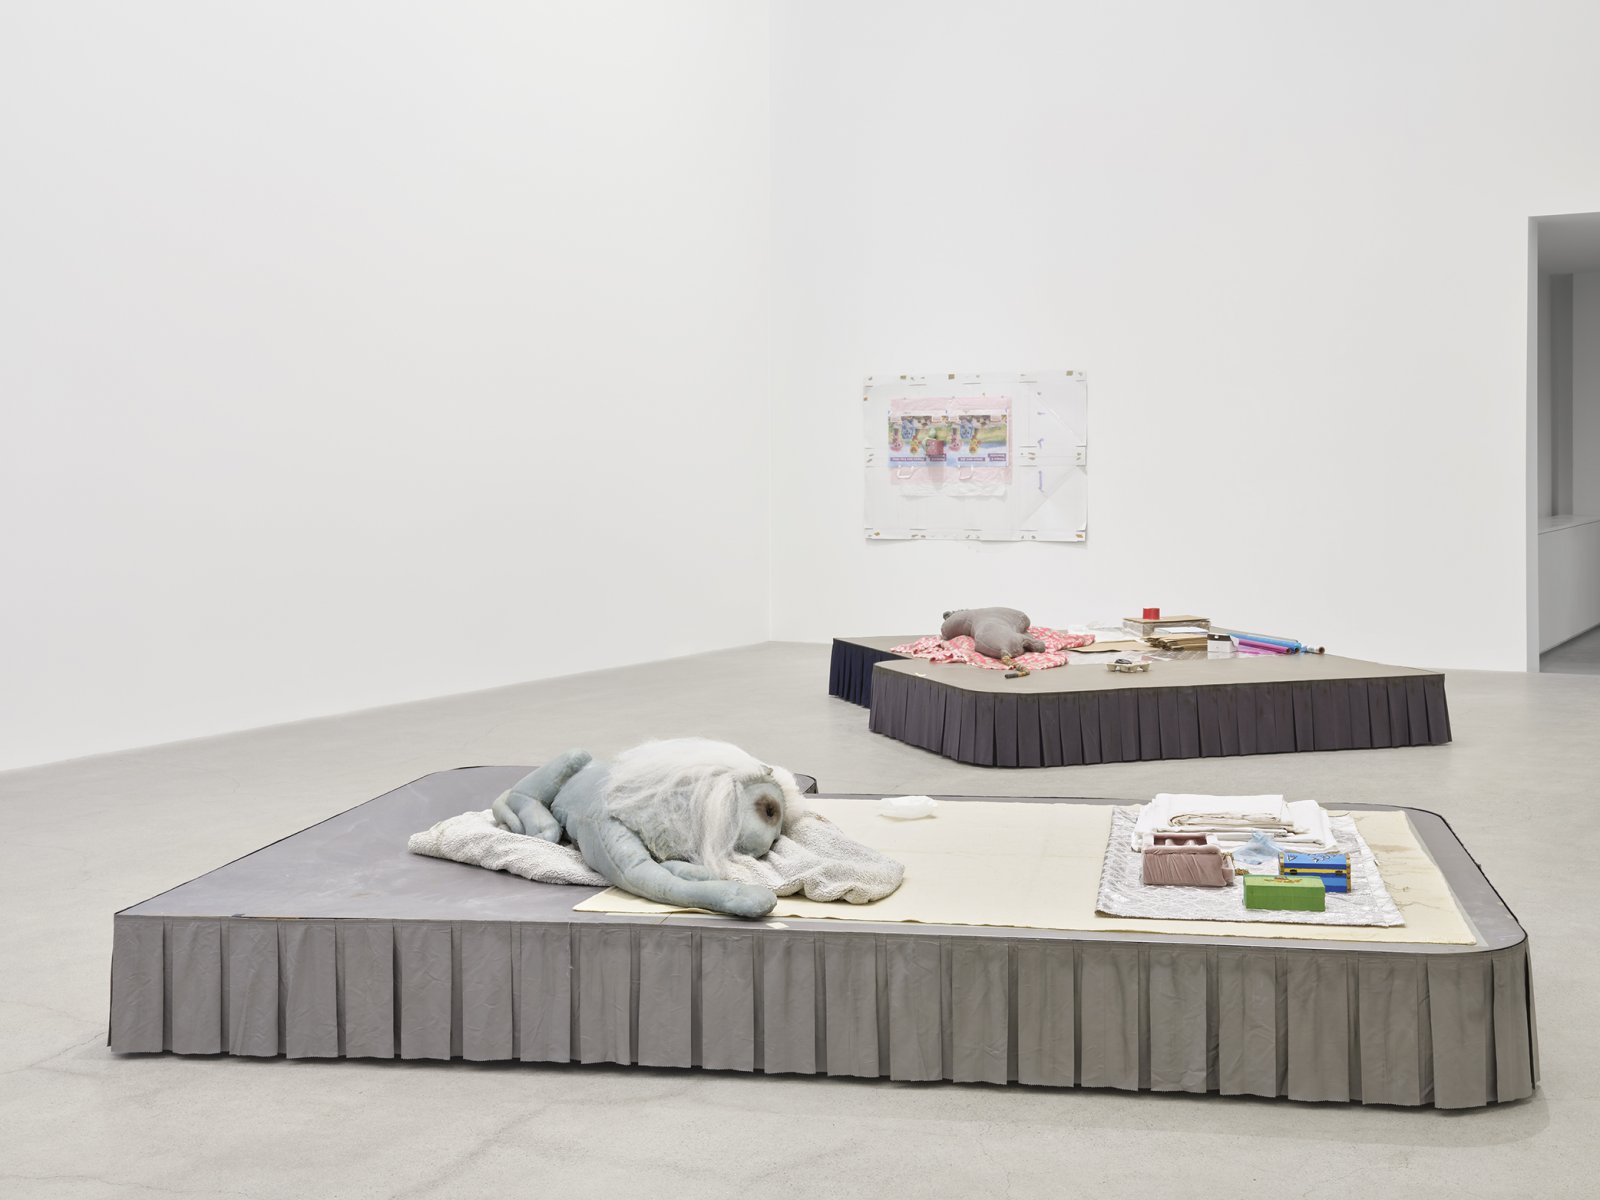 ​Liz Magor, installation view, Downer, Catriona Jeffries, Vancouver, 2020 by Liz Magor